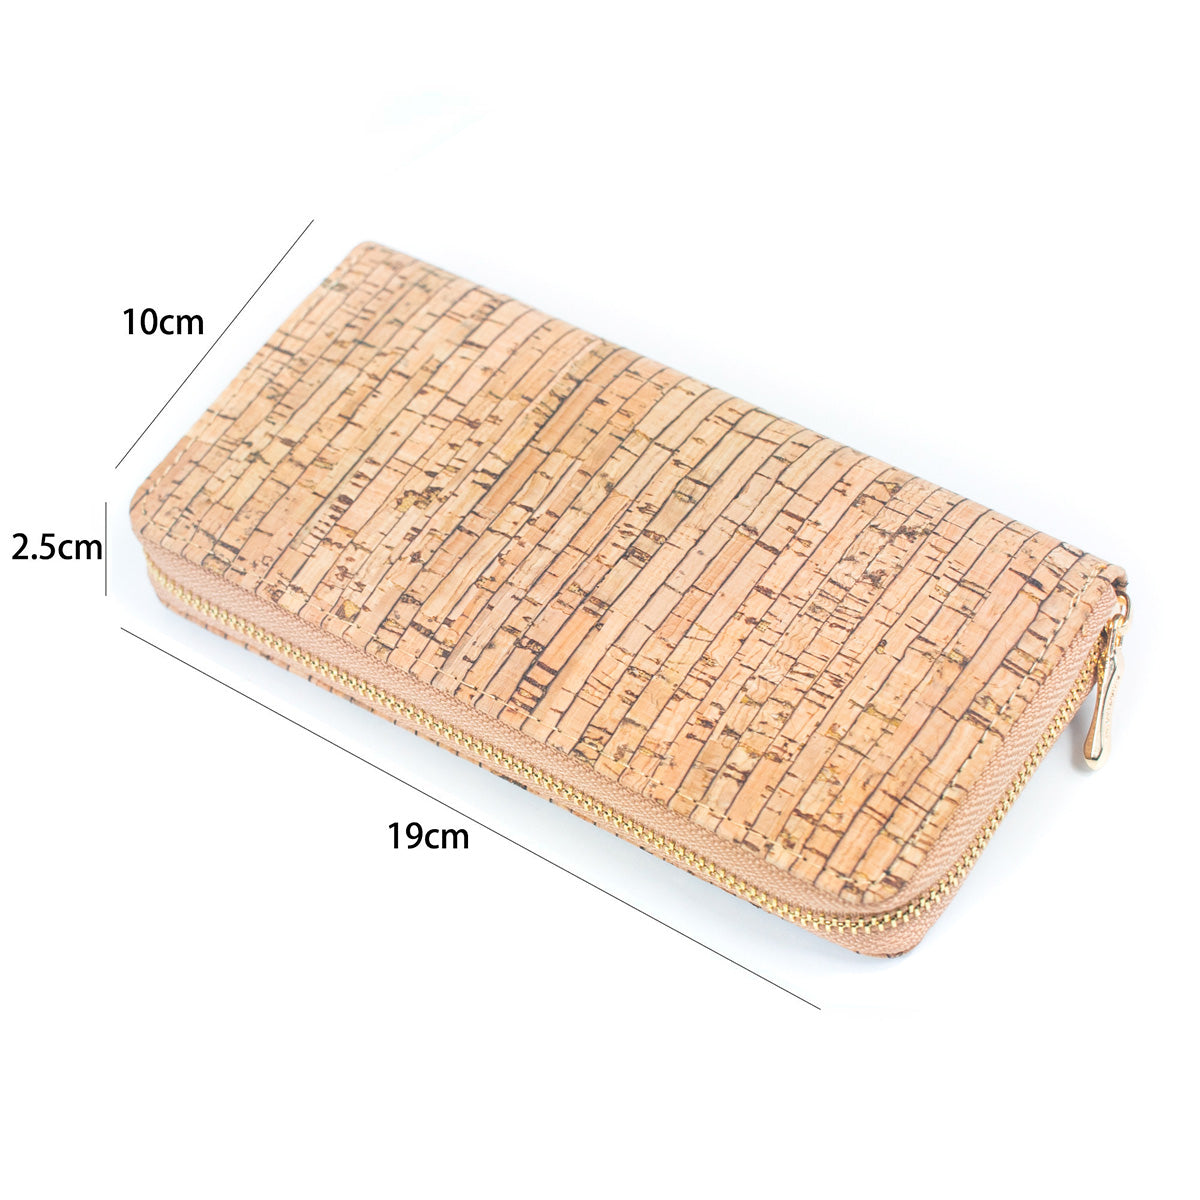 Striped Natural Cork Women's Long Wallet | THE CORK COLLECTION